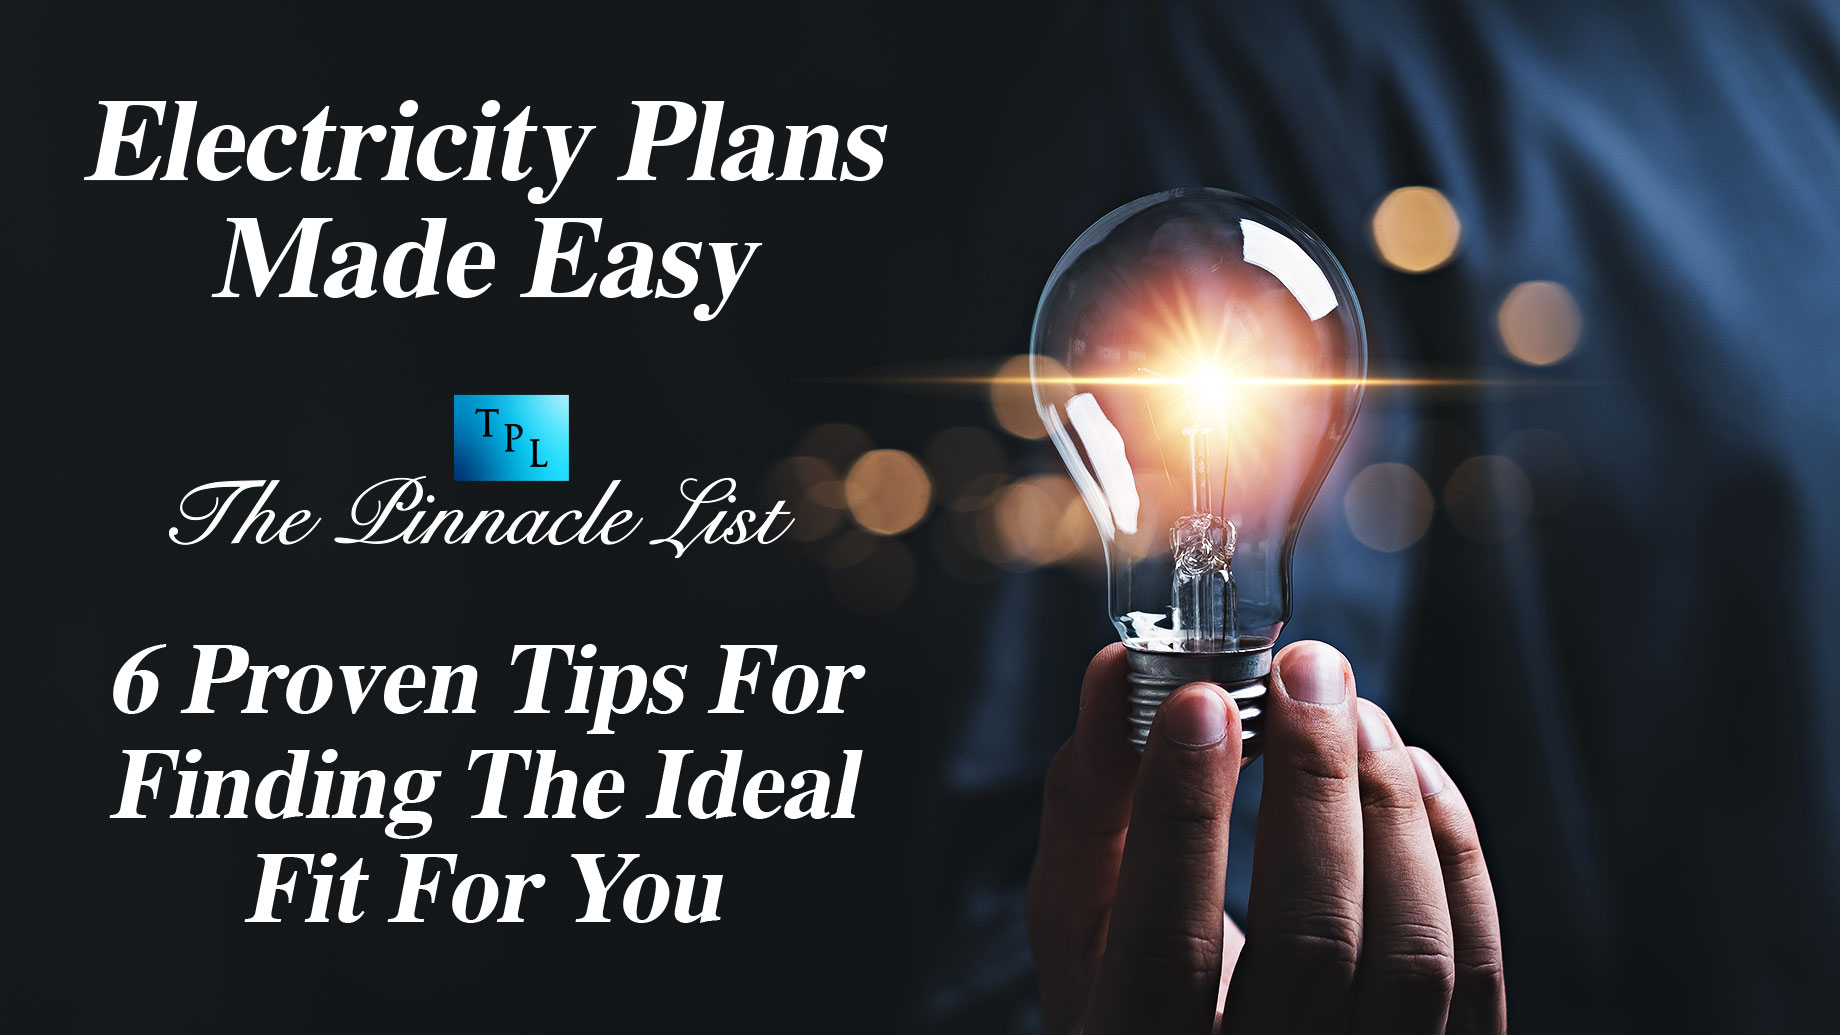 Electricity Plans Made Easy: 6 Proven Tips For Finding The Ideal Fit For You